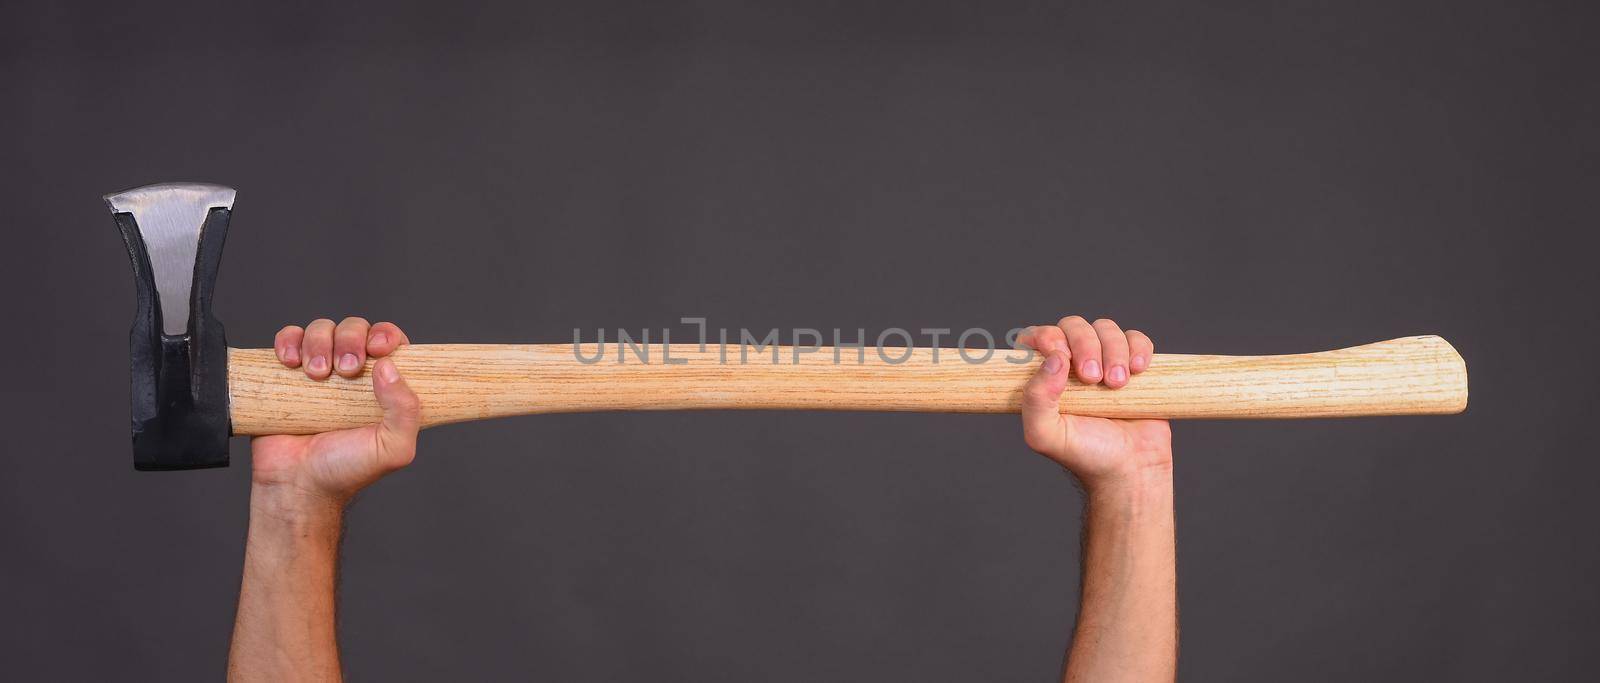 a large axe in the hands of men. a wood chopper. banner on a gray background. horizontal. copy space